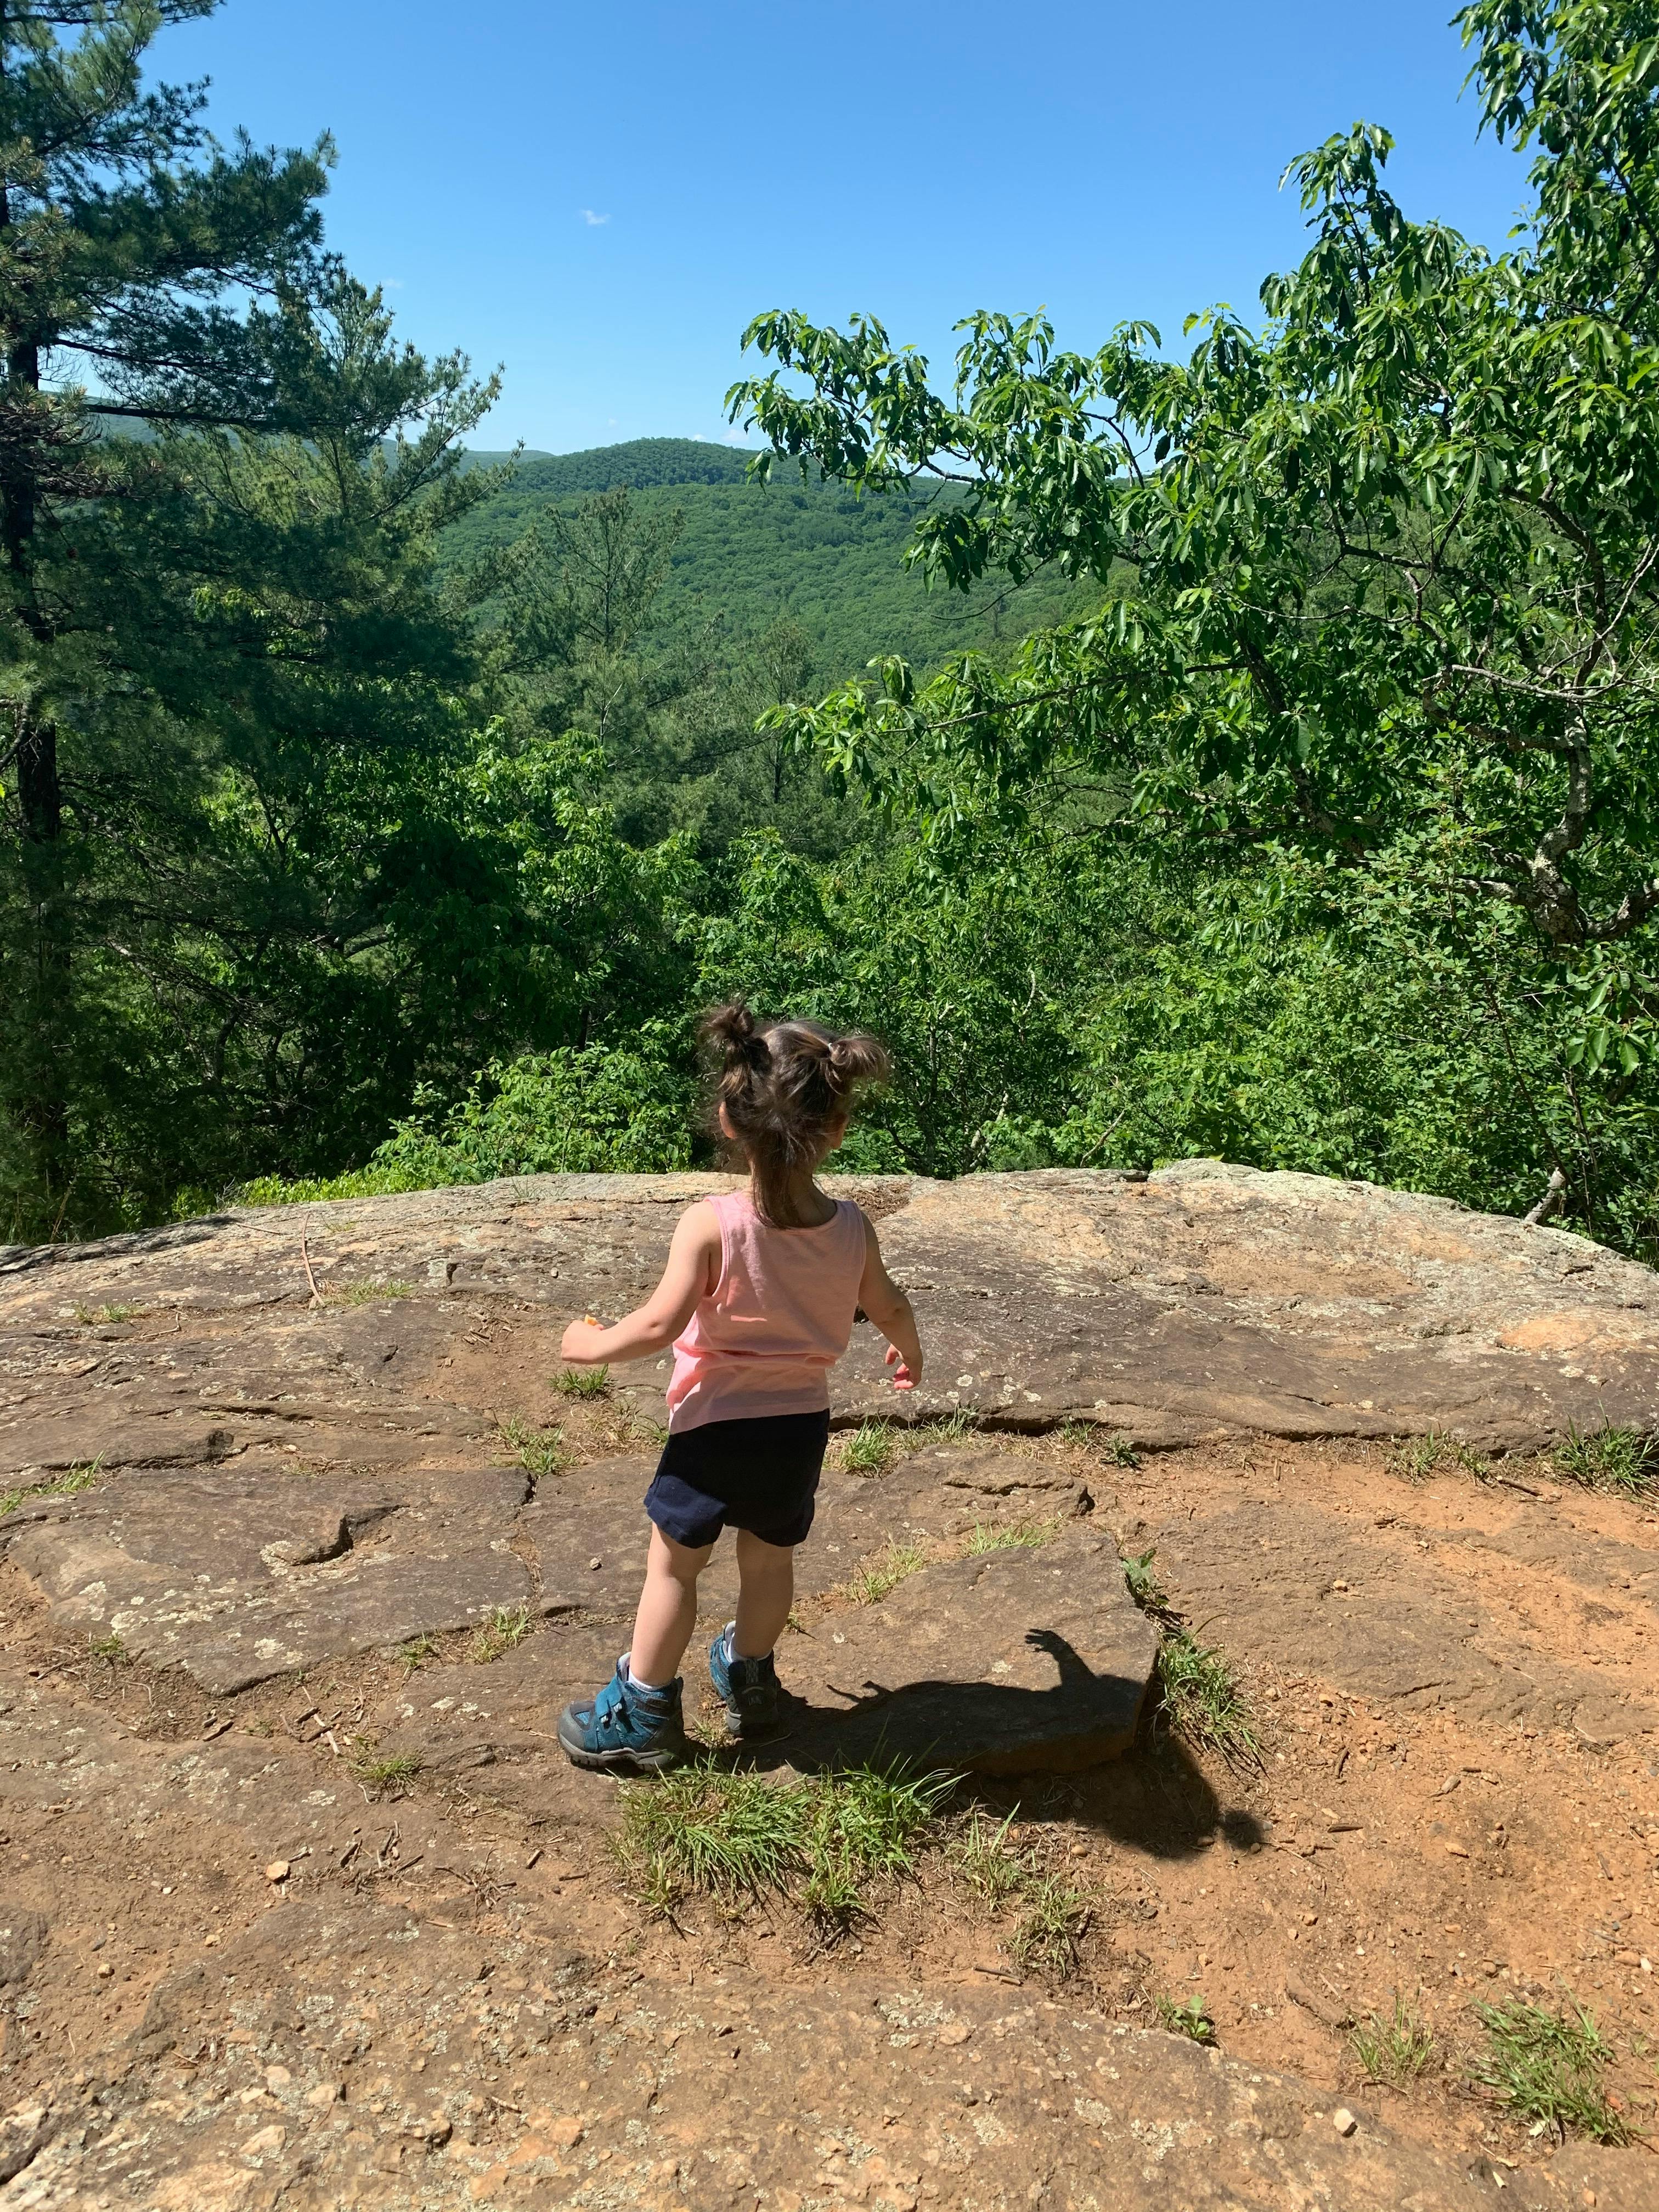 A little girl with pigtails stands on a rock and looks out at a hilly wooded area